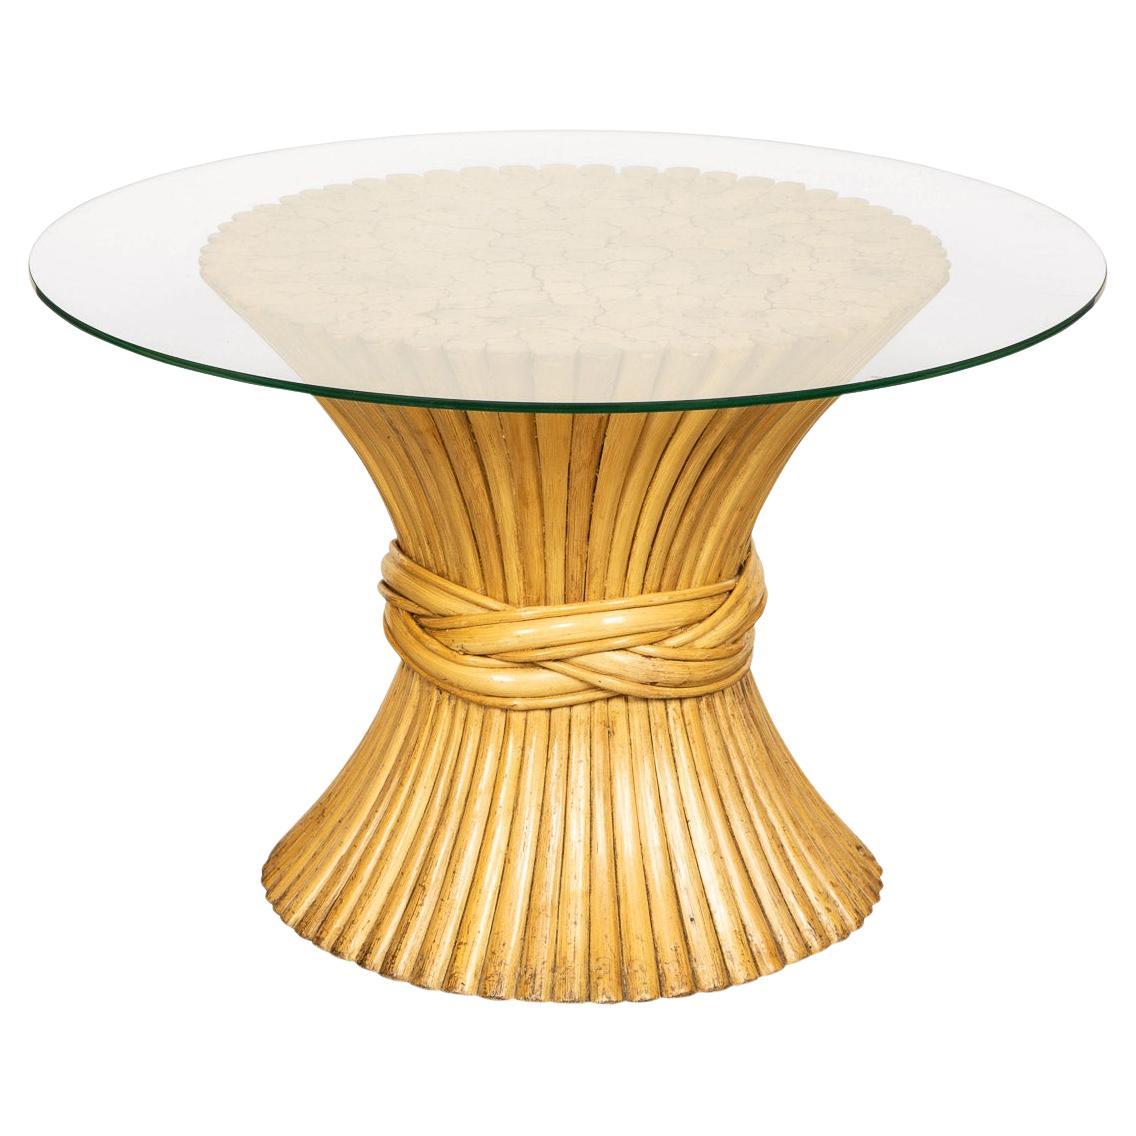 20th Century "Sheaf of Wheat" Coffee Table by McGuire, c.1970